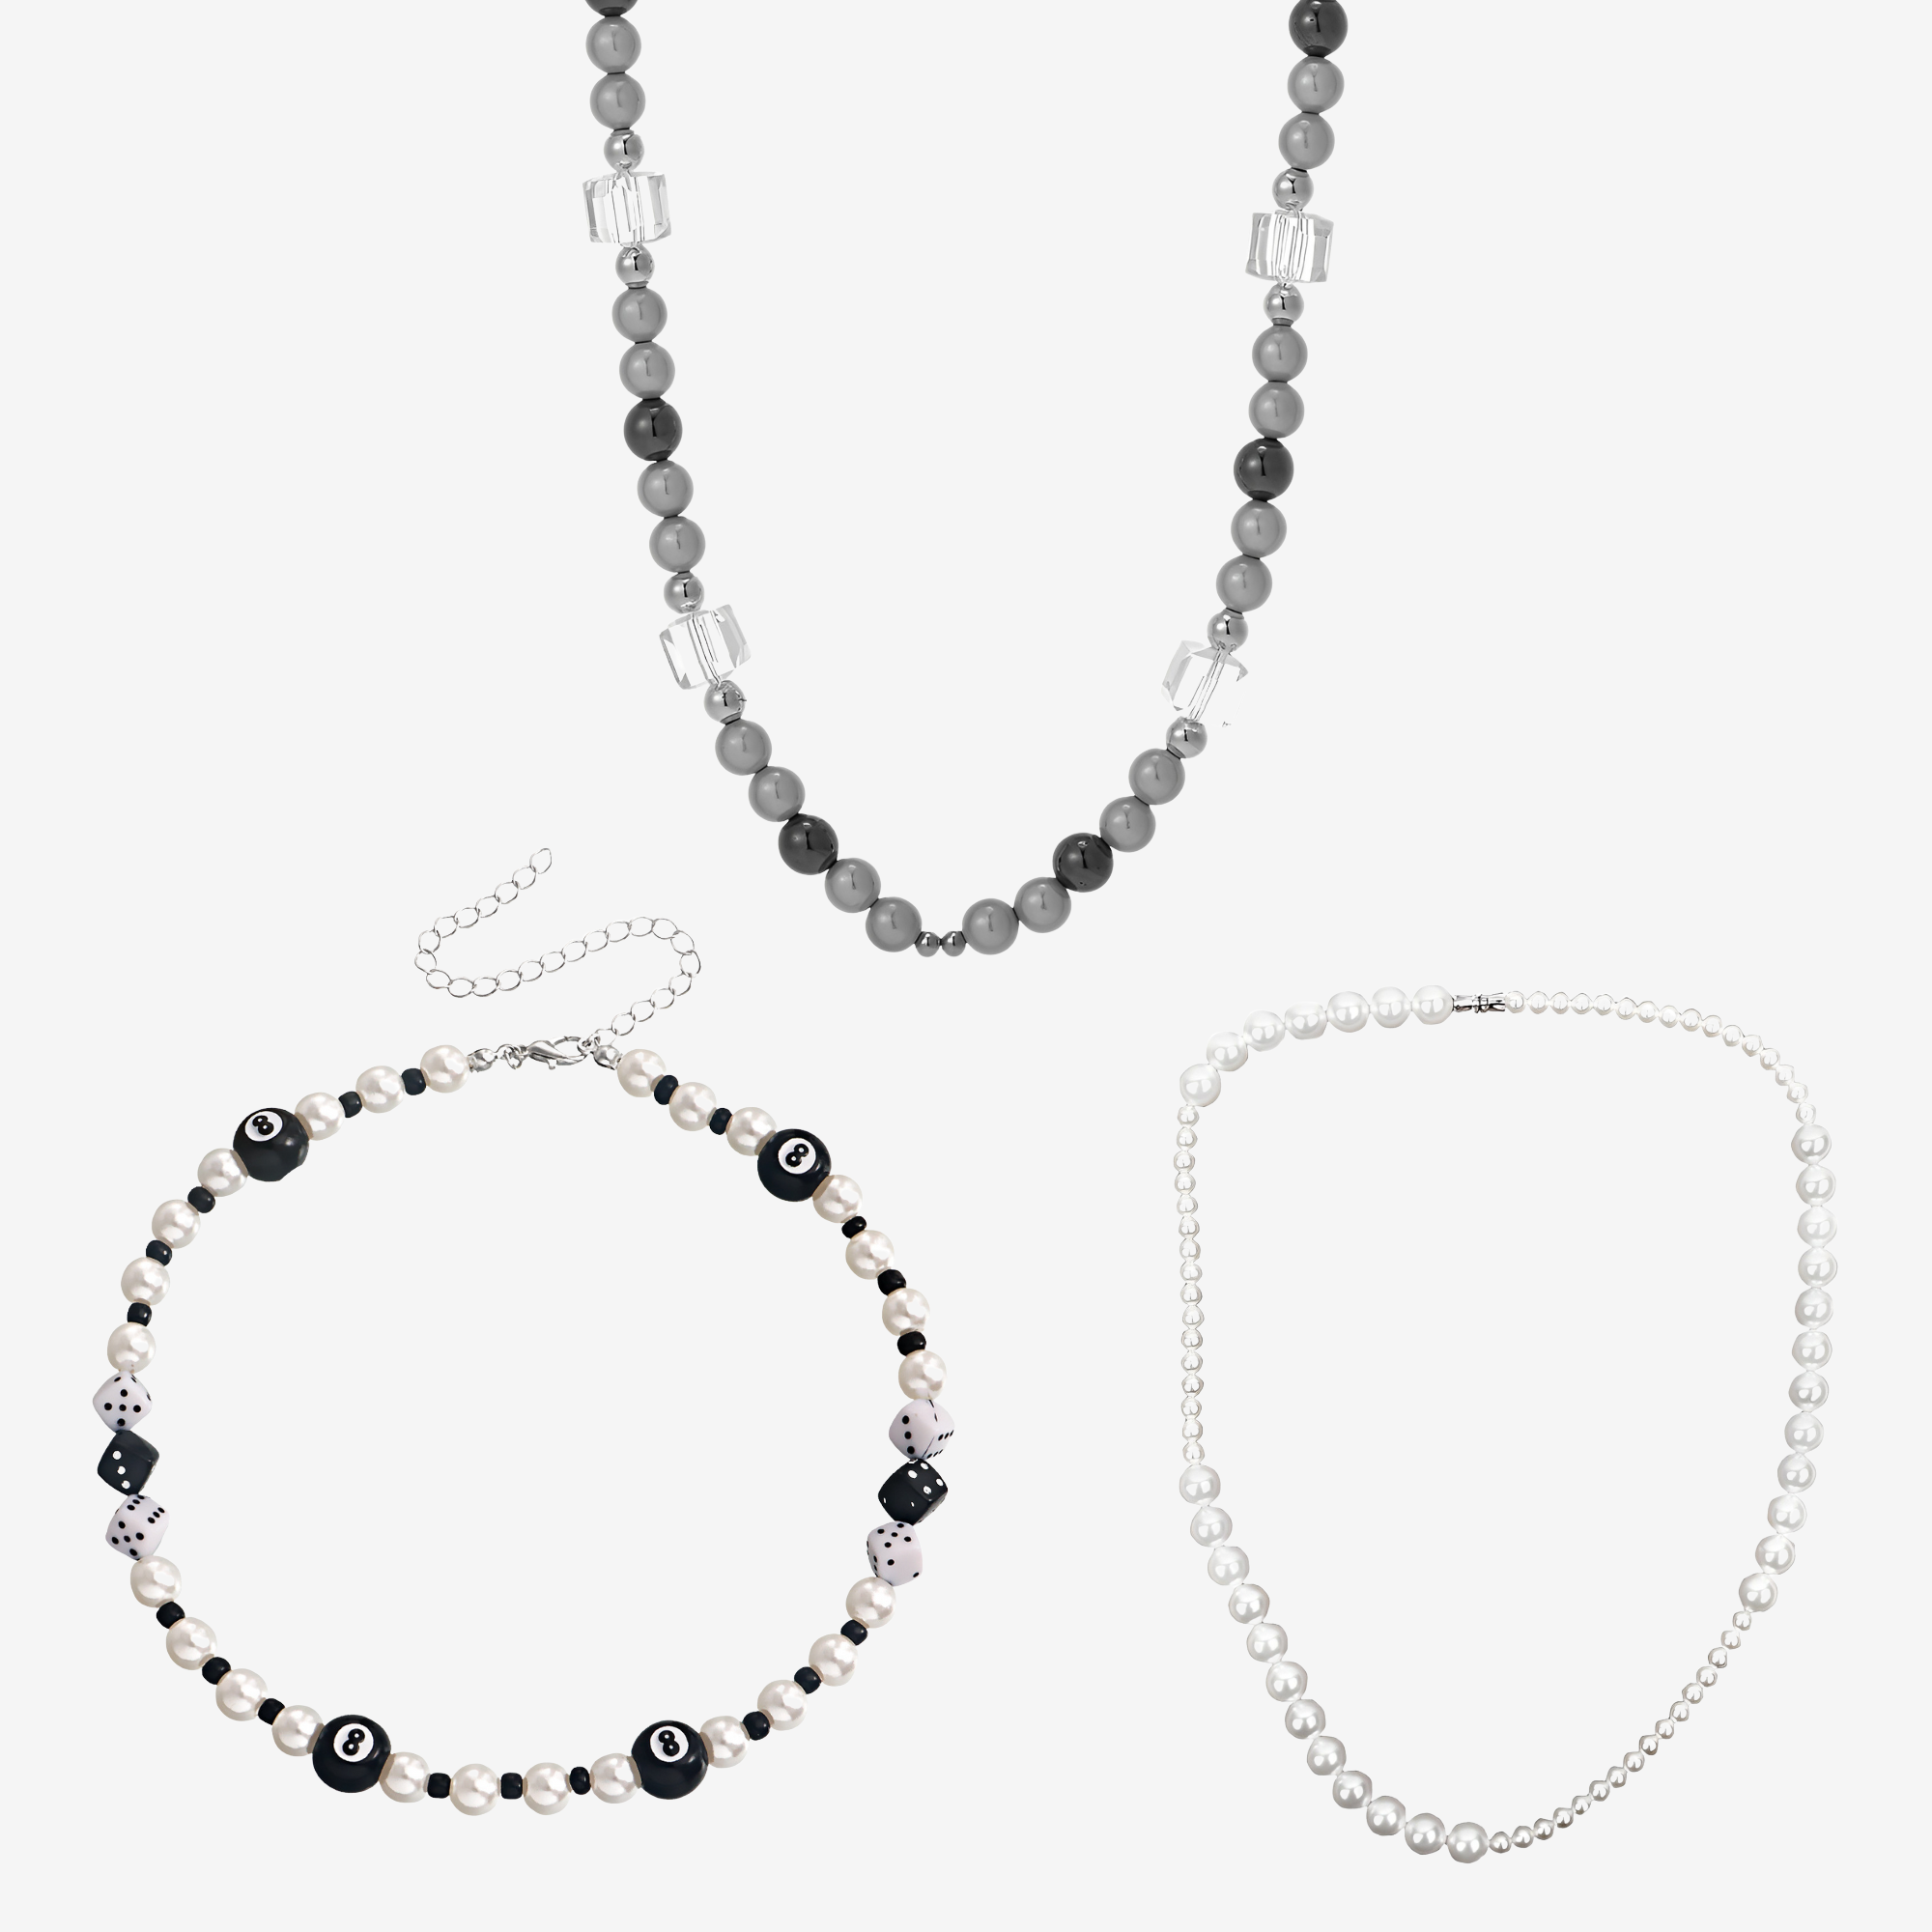 Hillenic Ultimate Pearl Necklaces Bundle, Bundle includes: WIND CRYSTAL PEARL NECKLACE, New in DICE-BILLIARDS PEARL NECKLACE & ASYMMETRIC PEARL NECKLACE